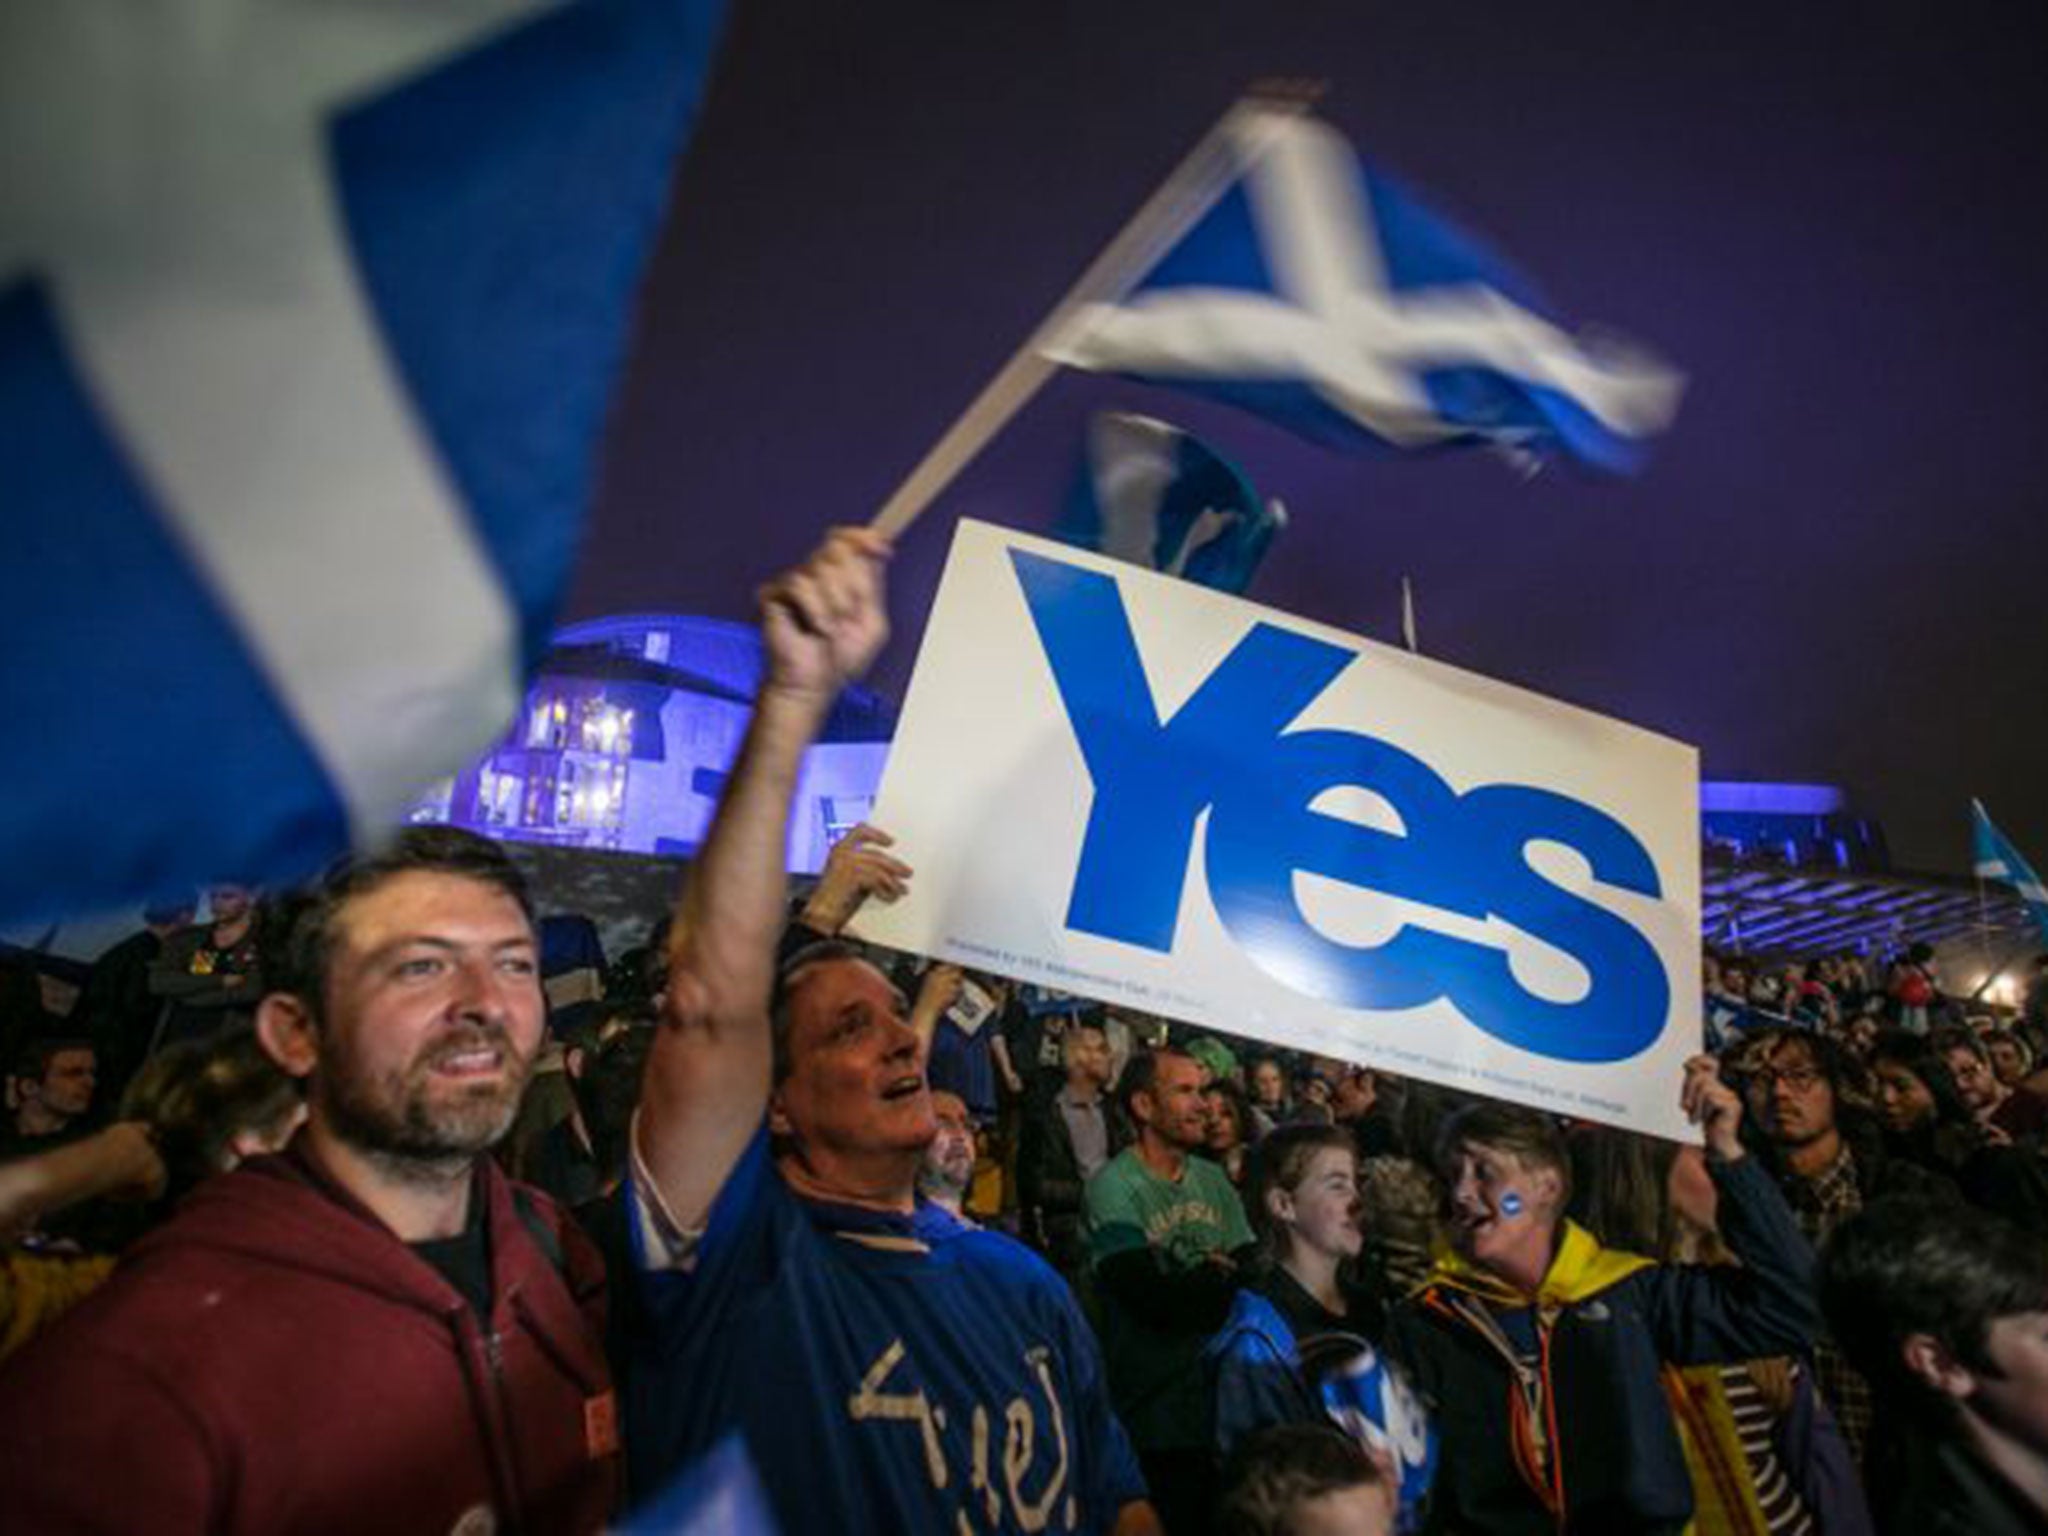 Support for Scottish independence has increased since the 2014 referendum